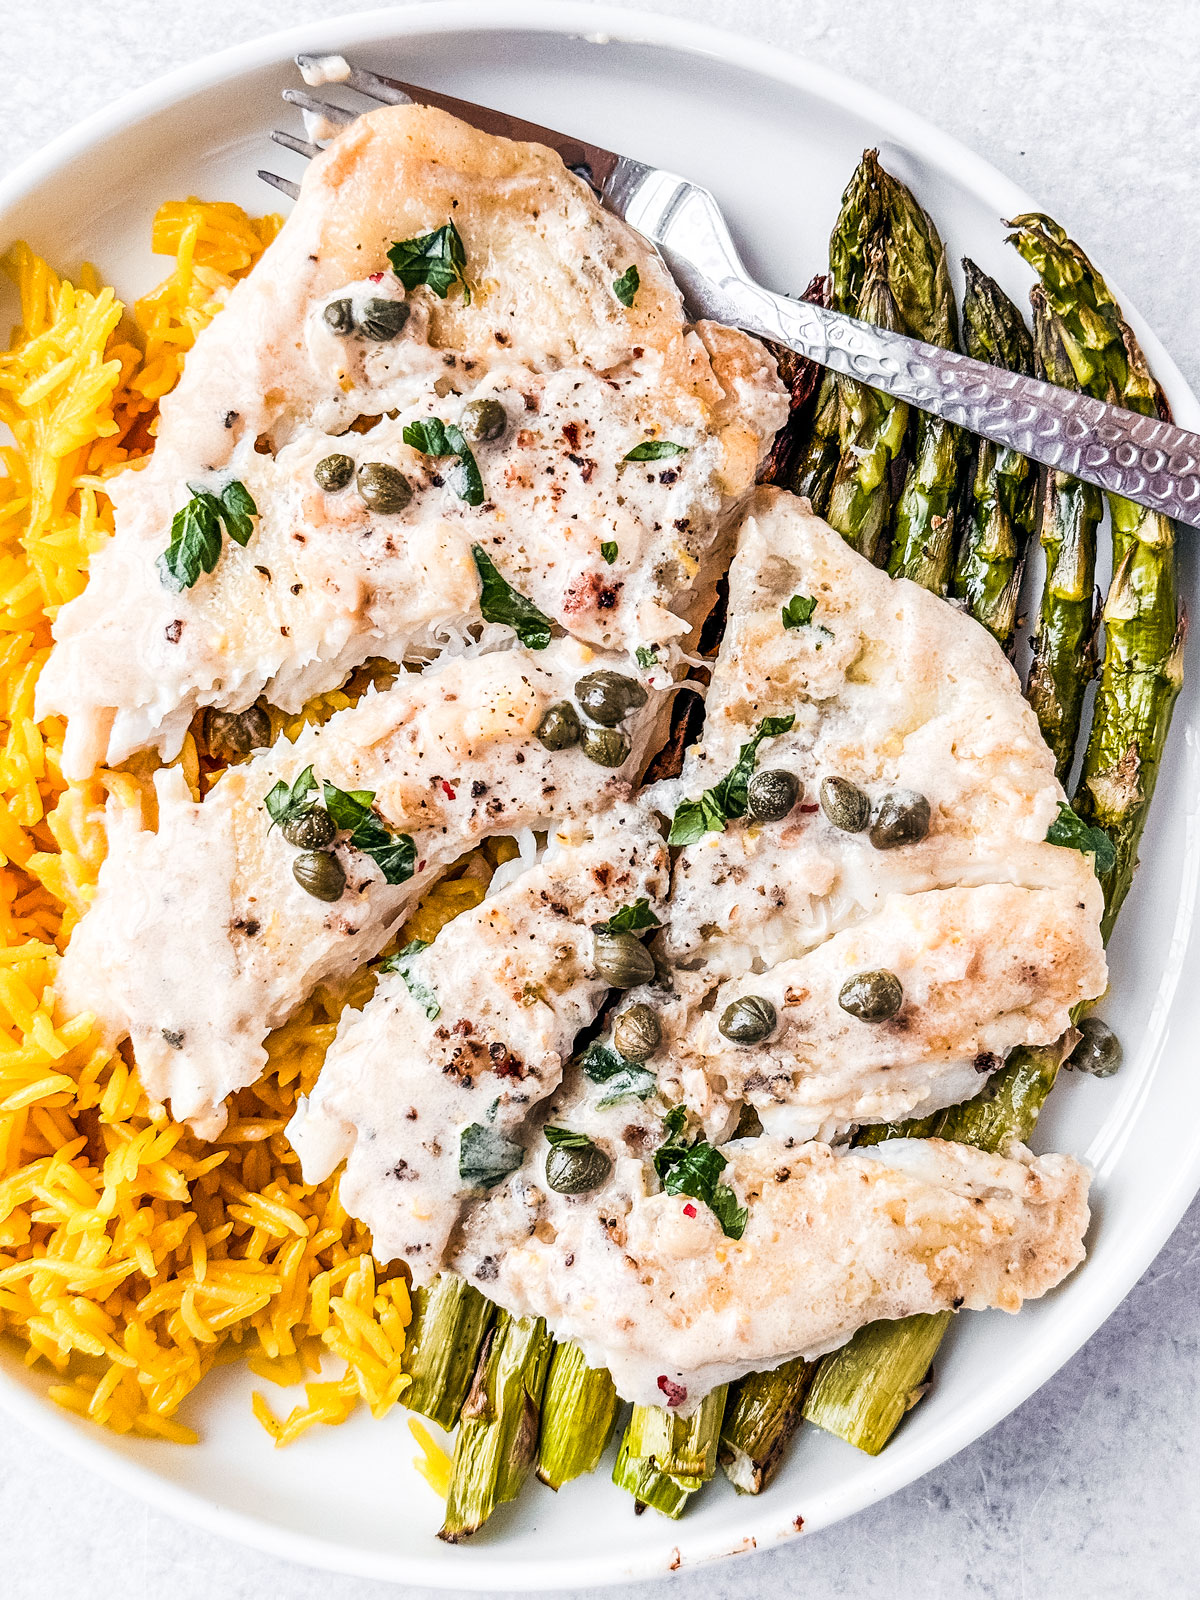 Flaked flounder fillet over rice and asparagus.